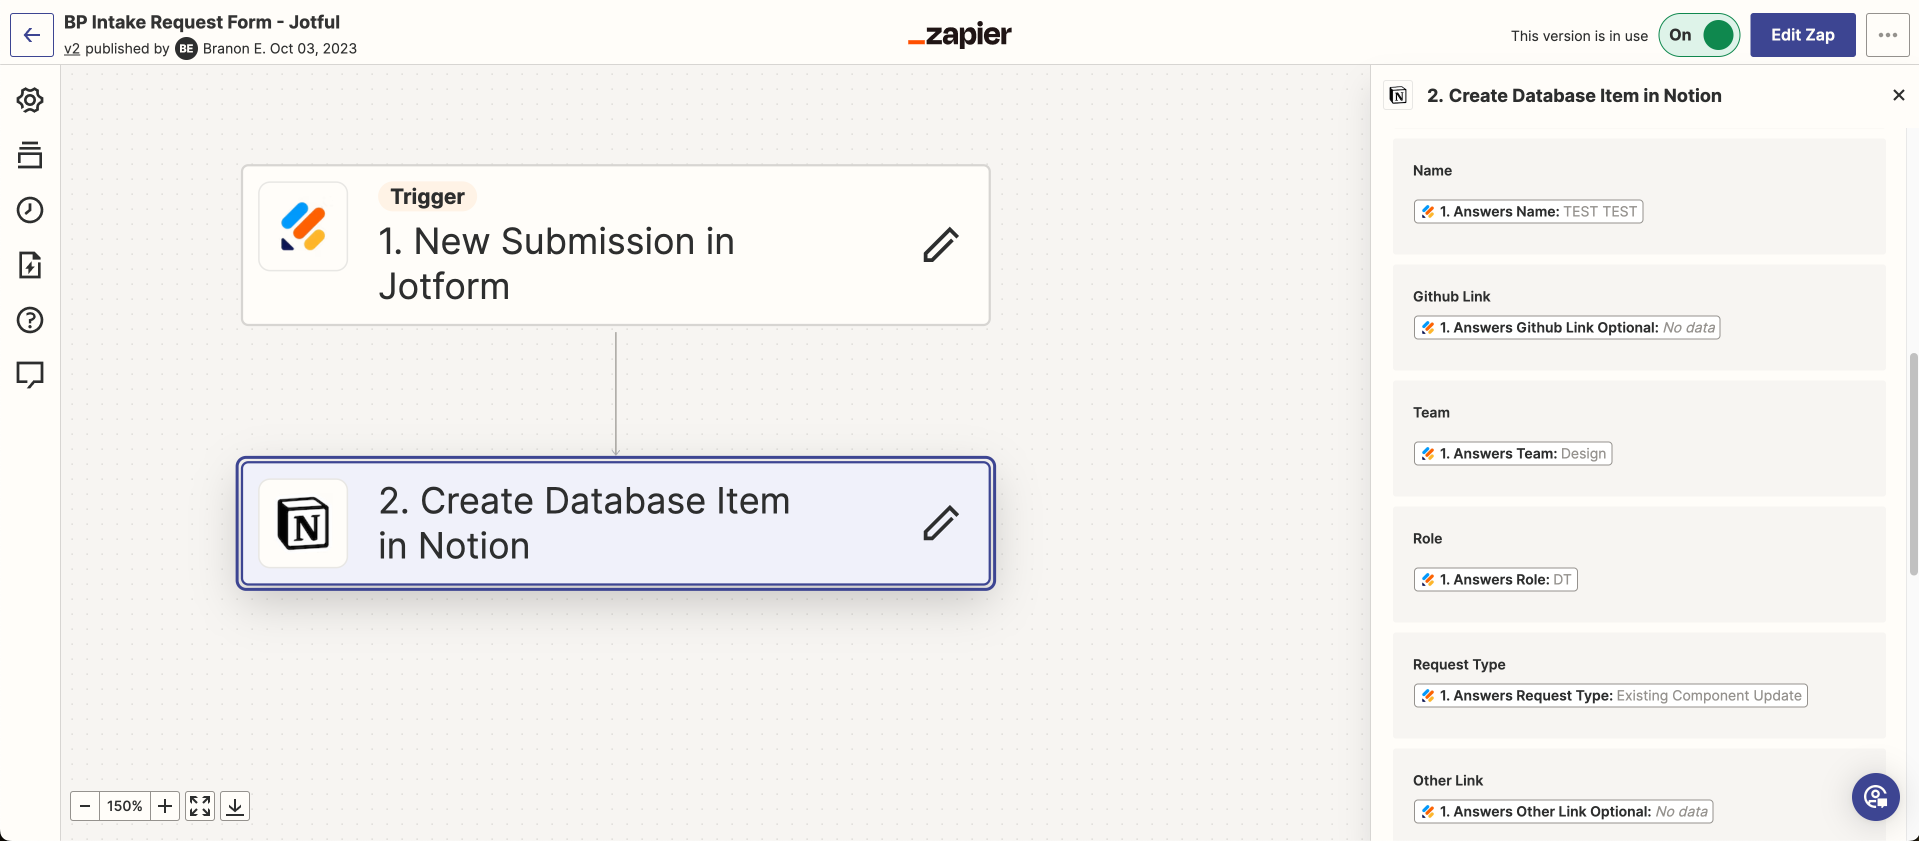 A Zapier integration between the form and the Notion table